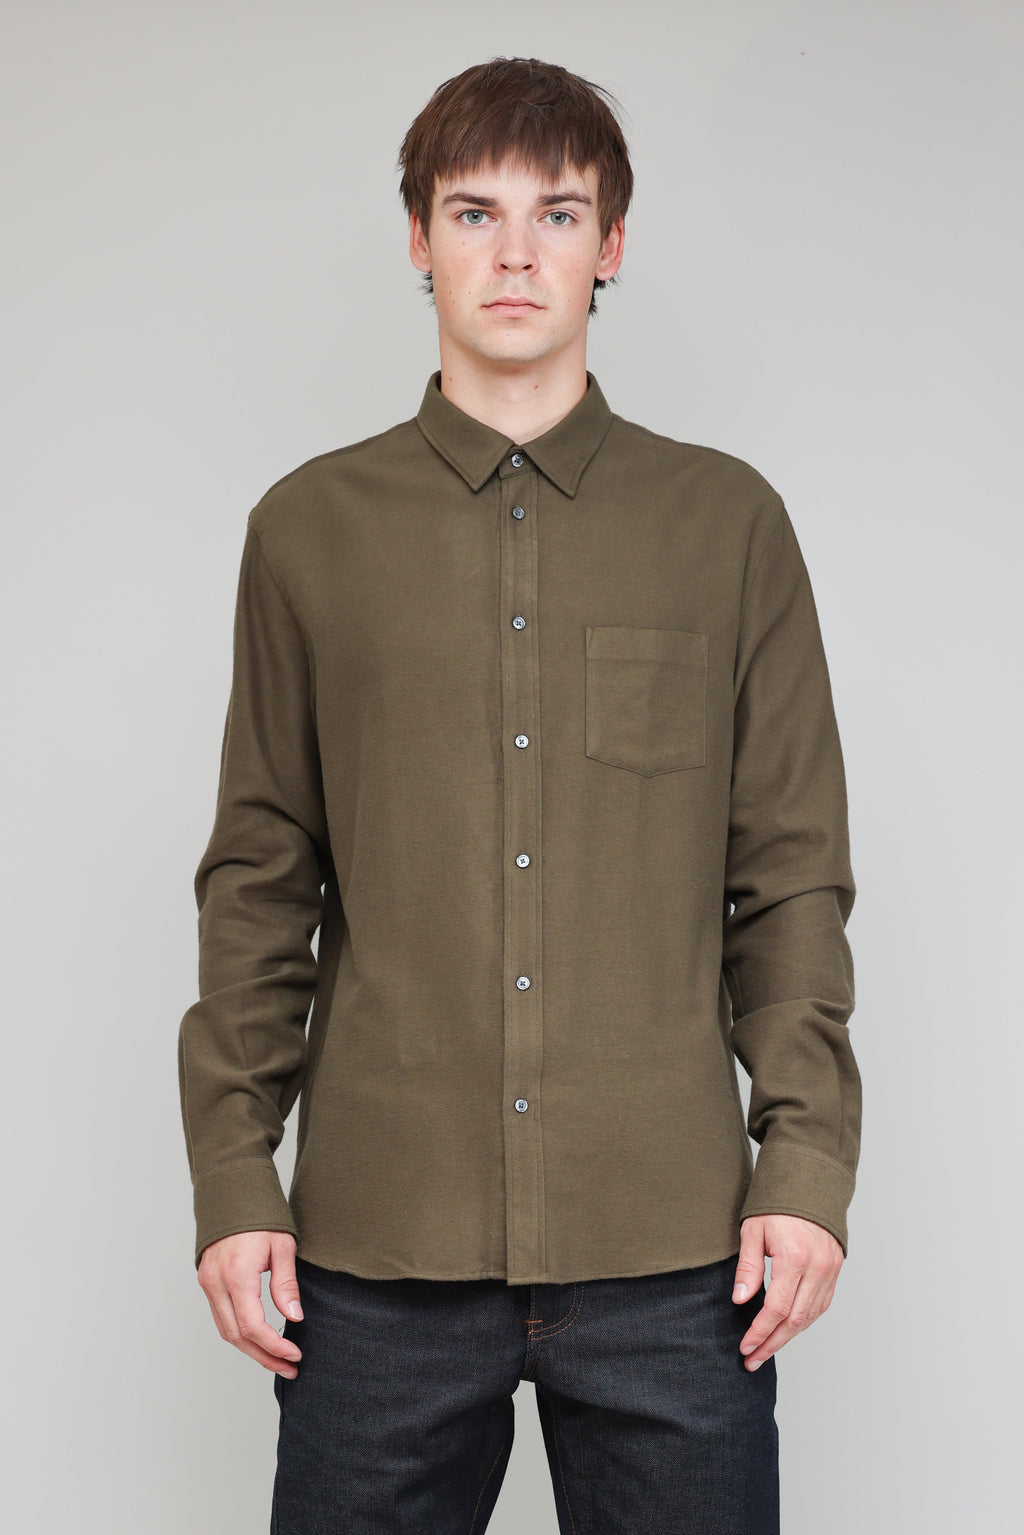 Japanese Flannel in Army Green 02